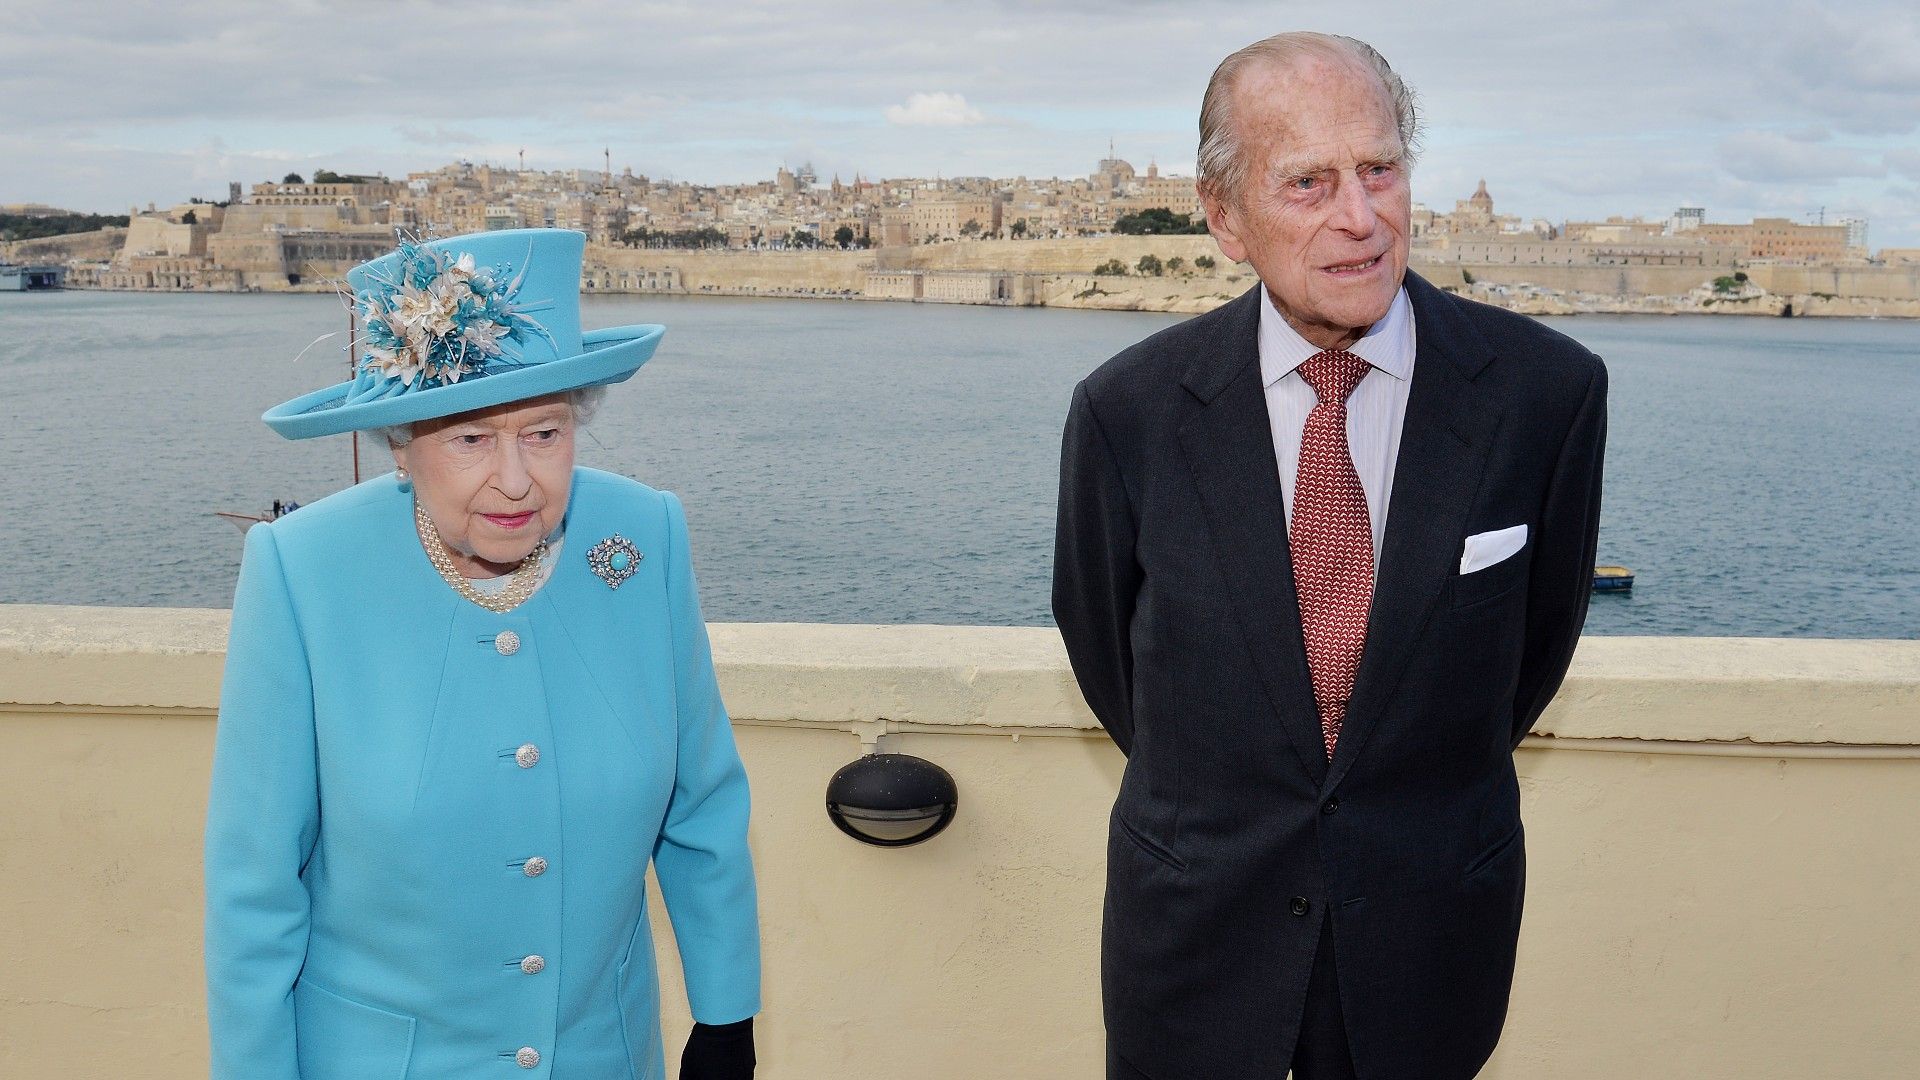 <p>                     The Duke of Edinburgh and Queen Elizabeth made their final visit to Malta in 2015, and it was a significant trip for lots of different reasons.                   </p>                                      <p>                     The royal couple spent much of their early married life in Malta between 1949 and 1951, as Prince Philip was stationed there in his role as a naval officer. Reportedly, their time in Malta was said to be one of the most 'normal' times of their entire lives. The couple – Philip especially – would go on to visit Malta on official visits numerous times over the following years.                   </p>                                      <p>                     And that’s not all - their 2015 trip to Malta was the Queen and Philip's final official overseas trip as a royal, making it all the more special.                   </p>                                      <p>                     During an earlier trip in 2005, Queen Elizabeth spoke of their joint fondness for Malta in an official speech. She said, "I know I speak for Prince Philip as well as myself in saying how pleased we are to be back in Malta. We both retain a deep affection for your country and the outgoing, generous Maltese people who have always offered us the hand of friendship."                   </p>